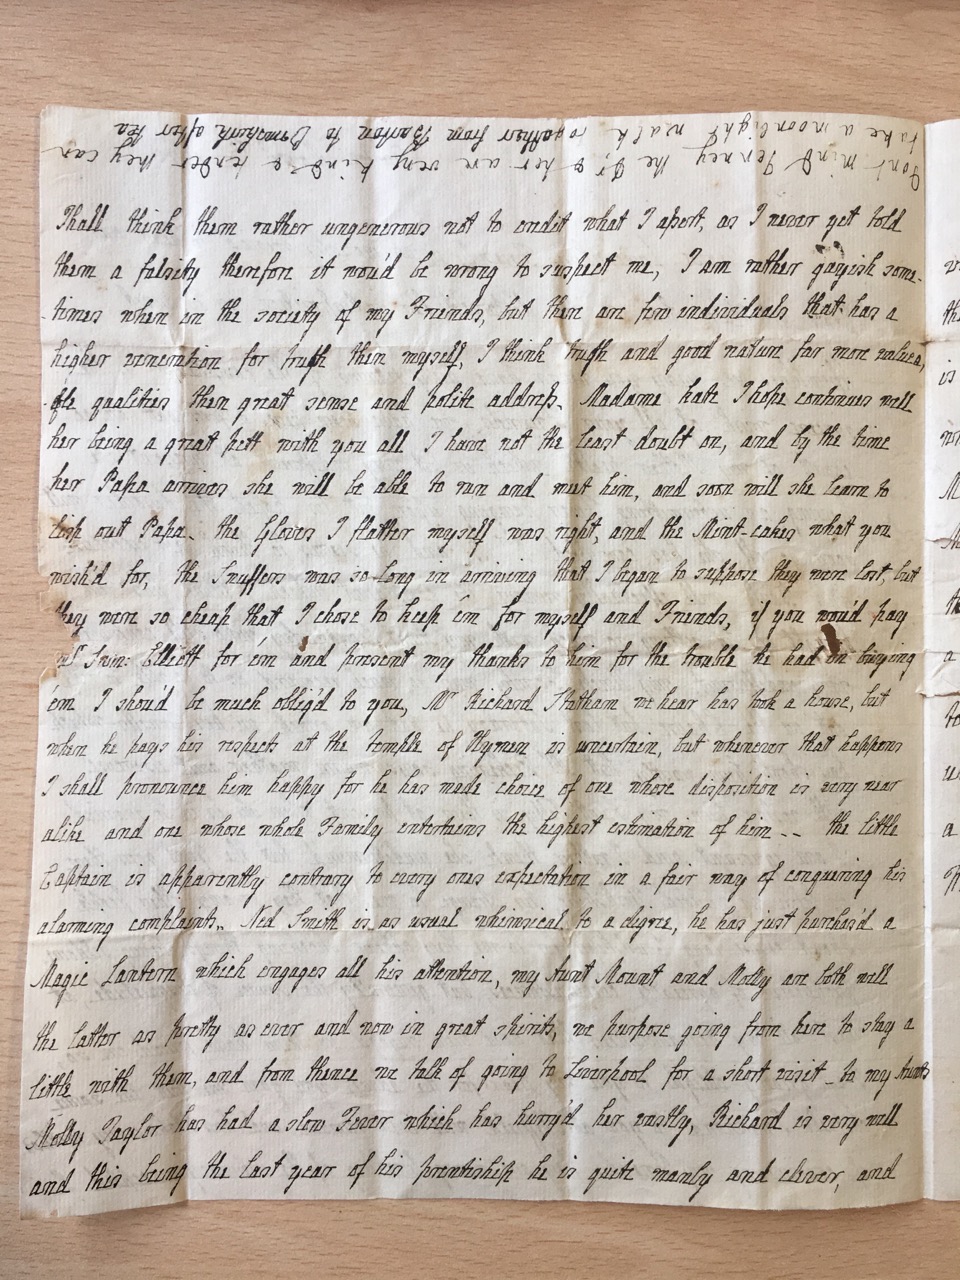 Image #2 of letter: J[enny] Brownsword to Ann Hare, 12 March 1773